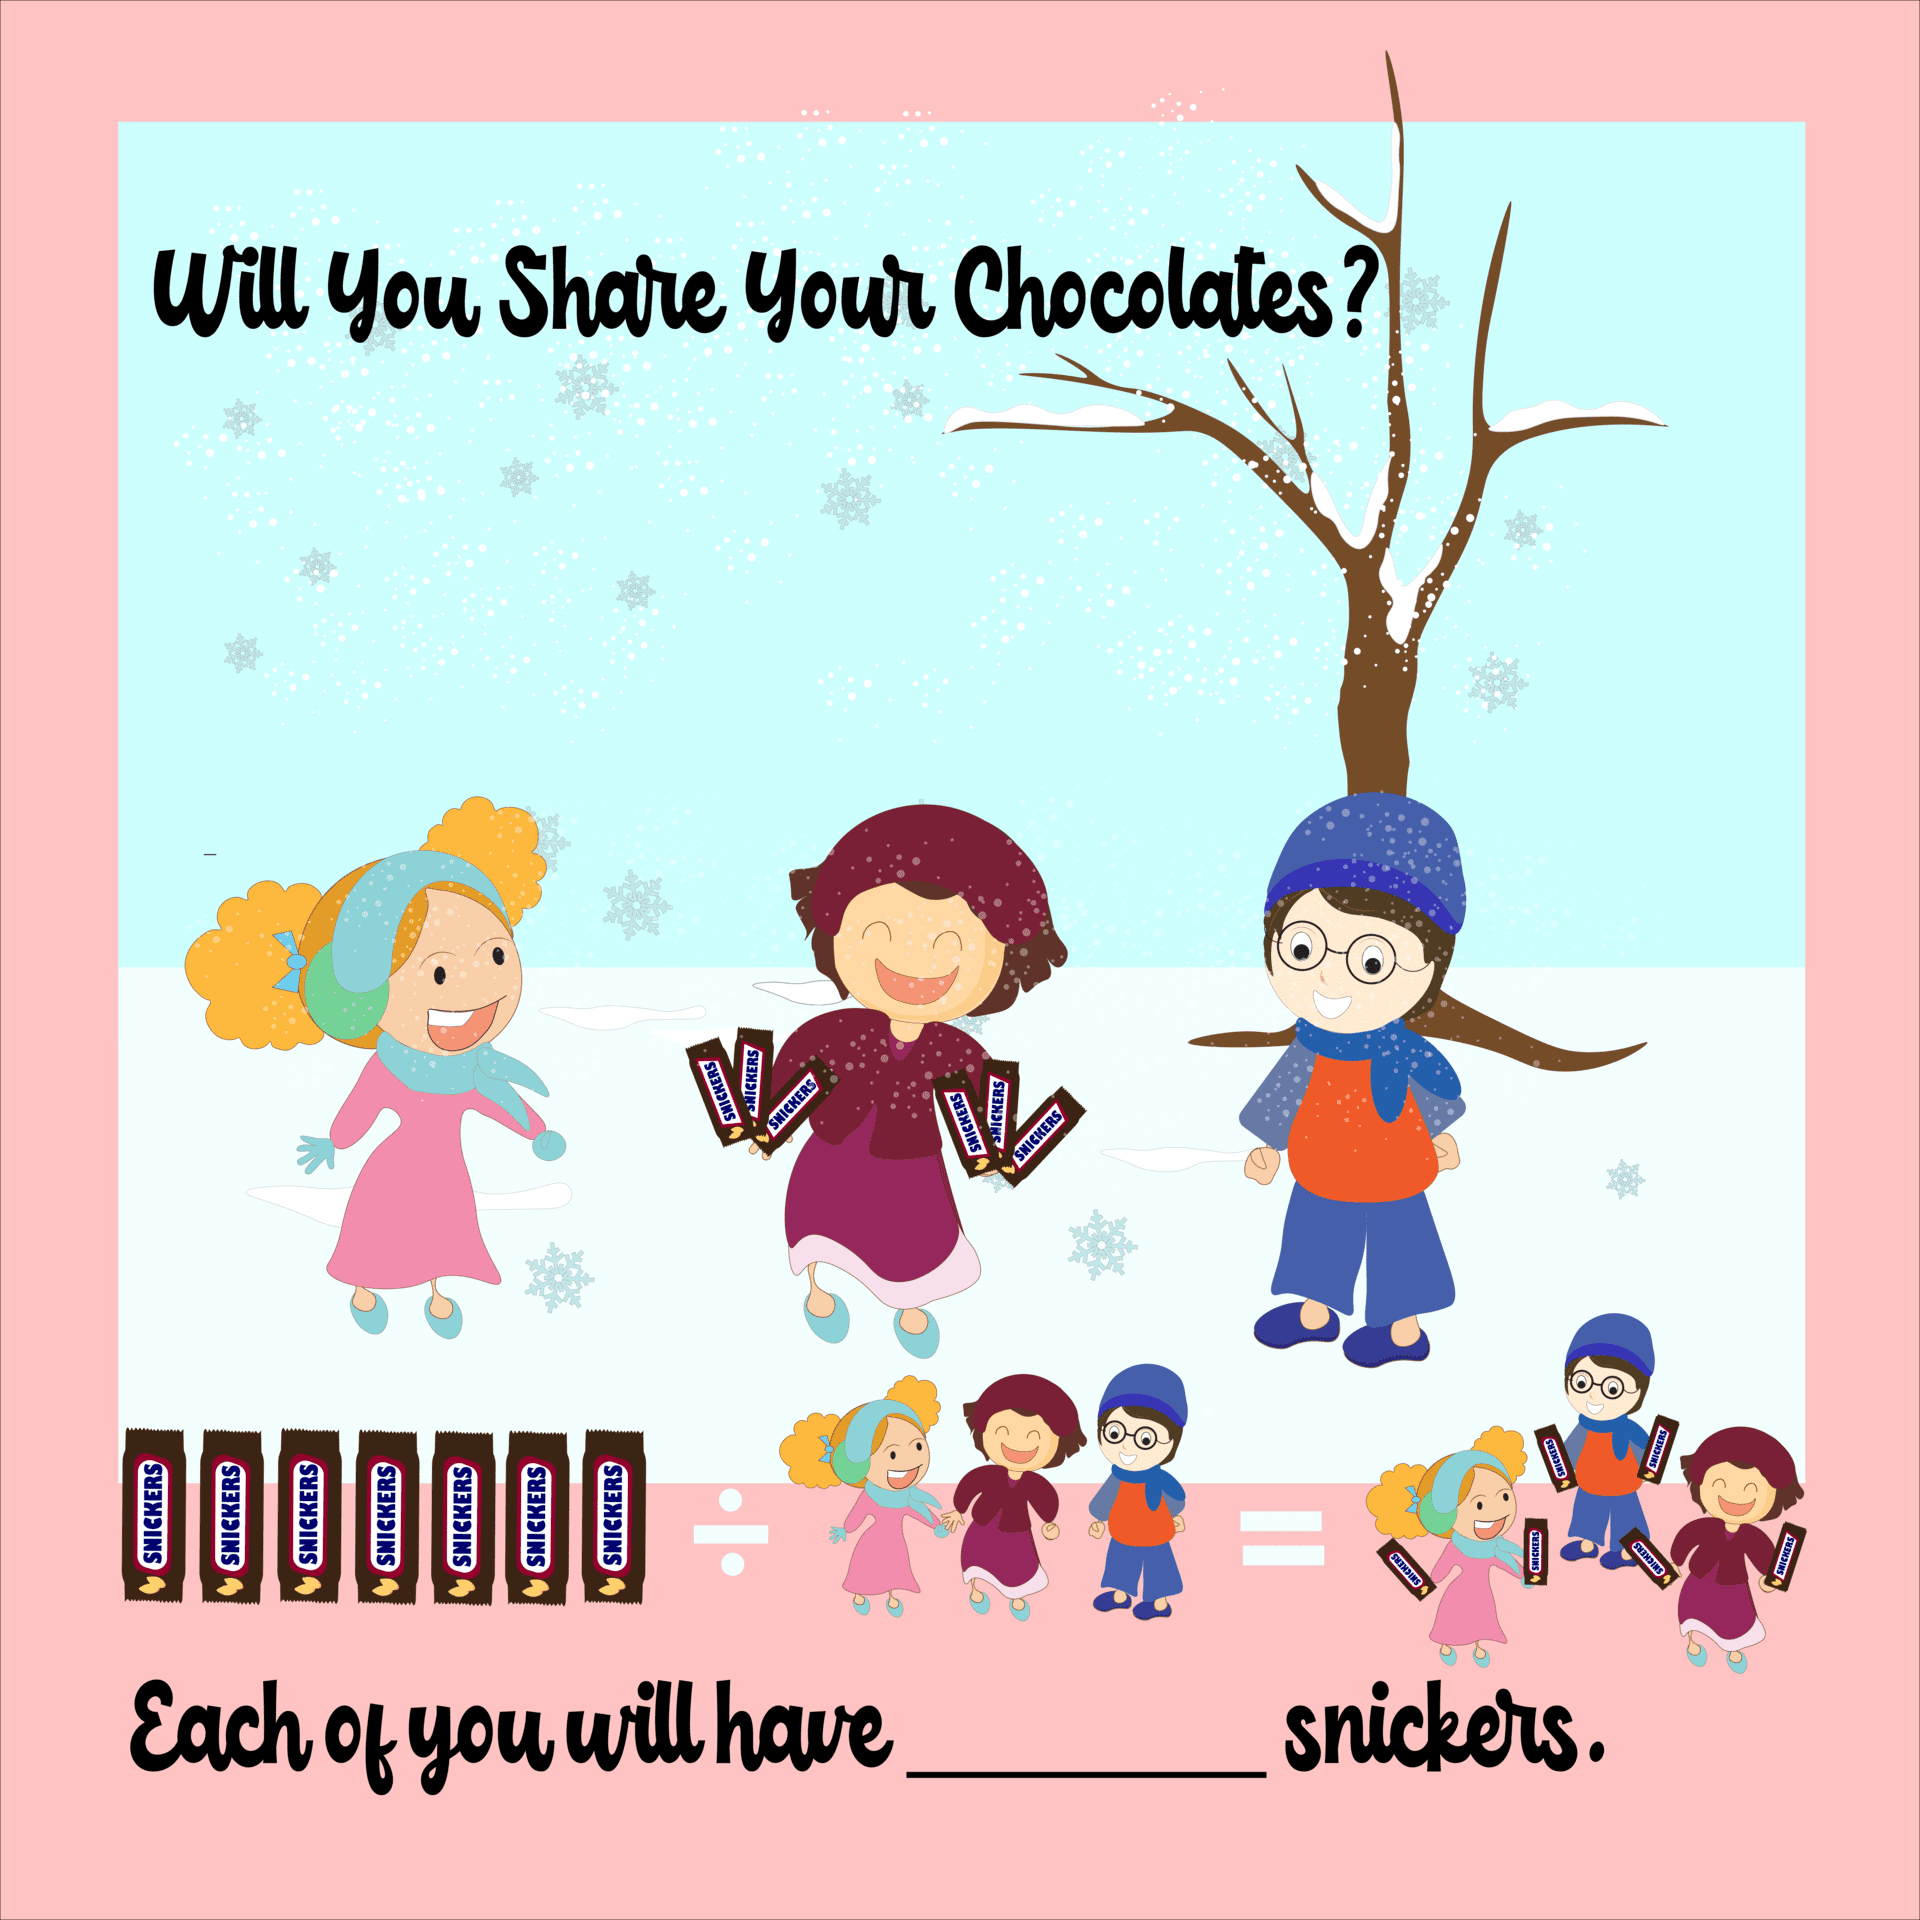 Applying Division Technique to Share Chocolates